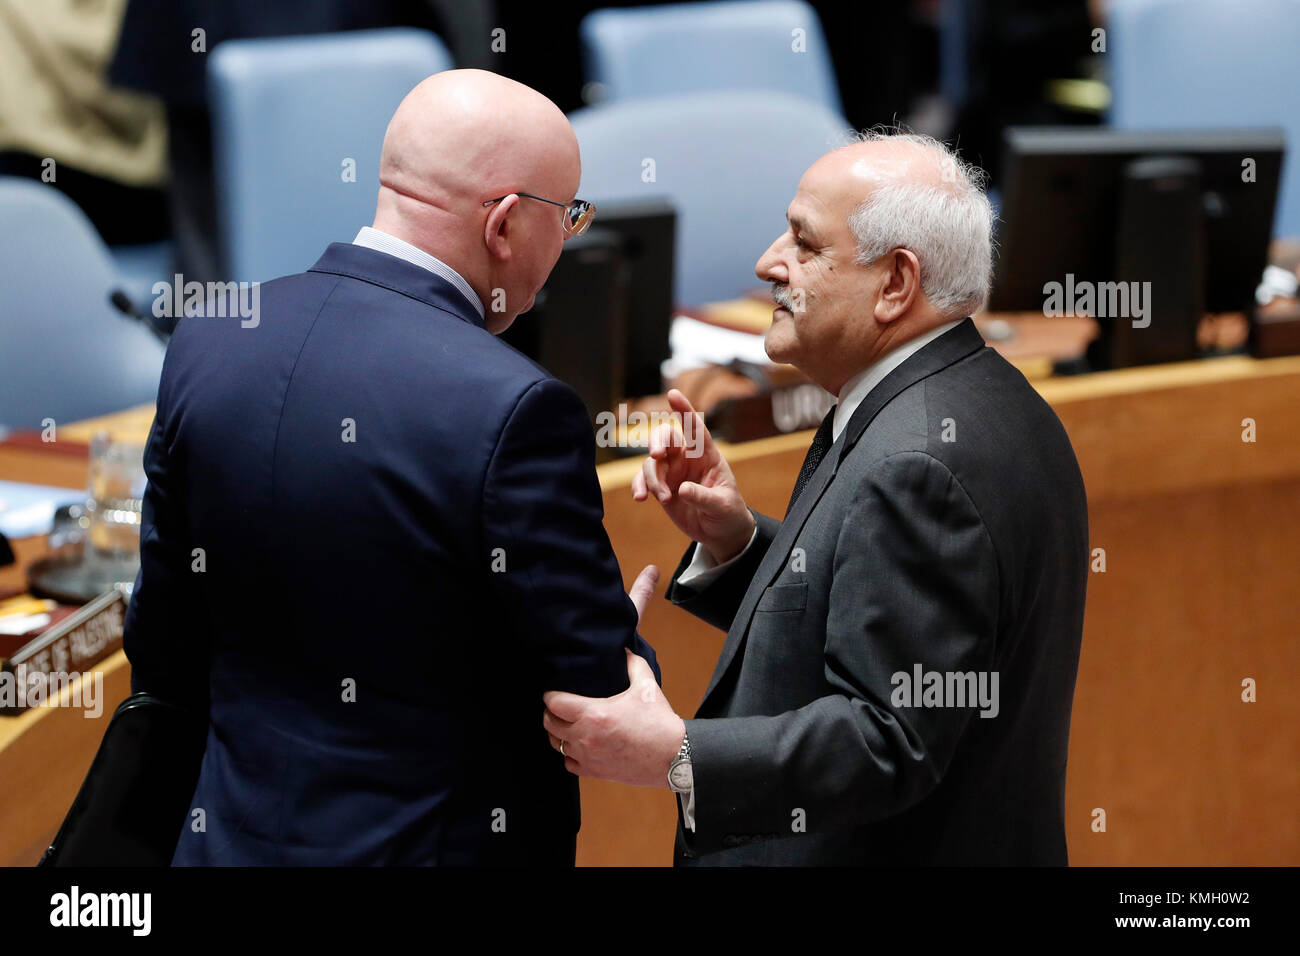 United Nations. 8th Dec, 2017. Palestinian permanent observer to the United Nations Riyad Mansour (R)speaks with Russian ambassador to the UN Vassily Nebenzia prior to the UN Security Council emergency meeting on Jerusalem at the UN headquarters in New York, on Dec. 8, 2017. Credit: Li Muzi/Xinhua/Alamy Live News Stock Photo